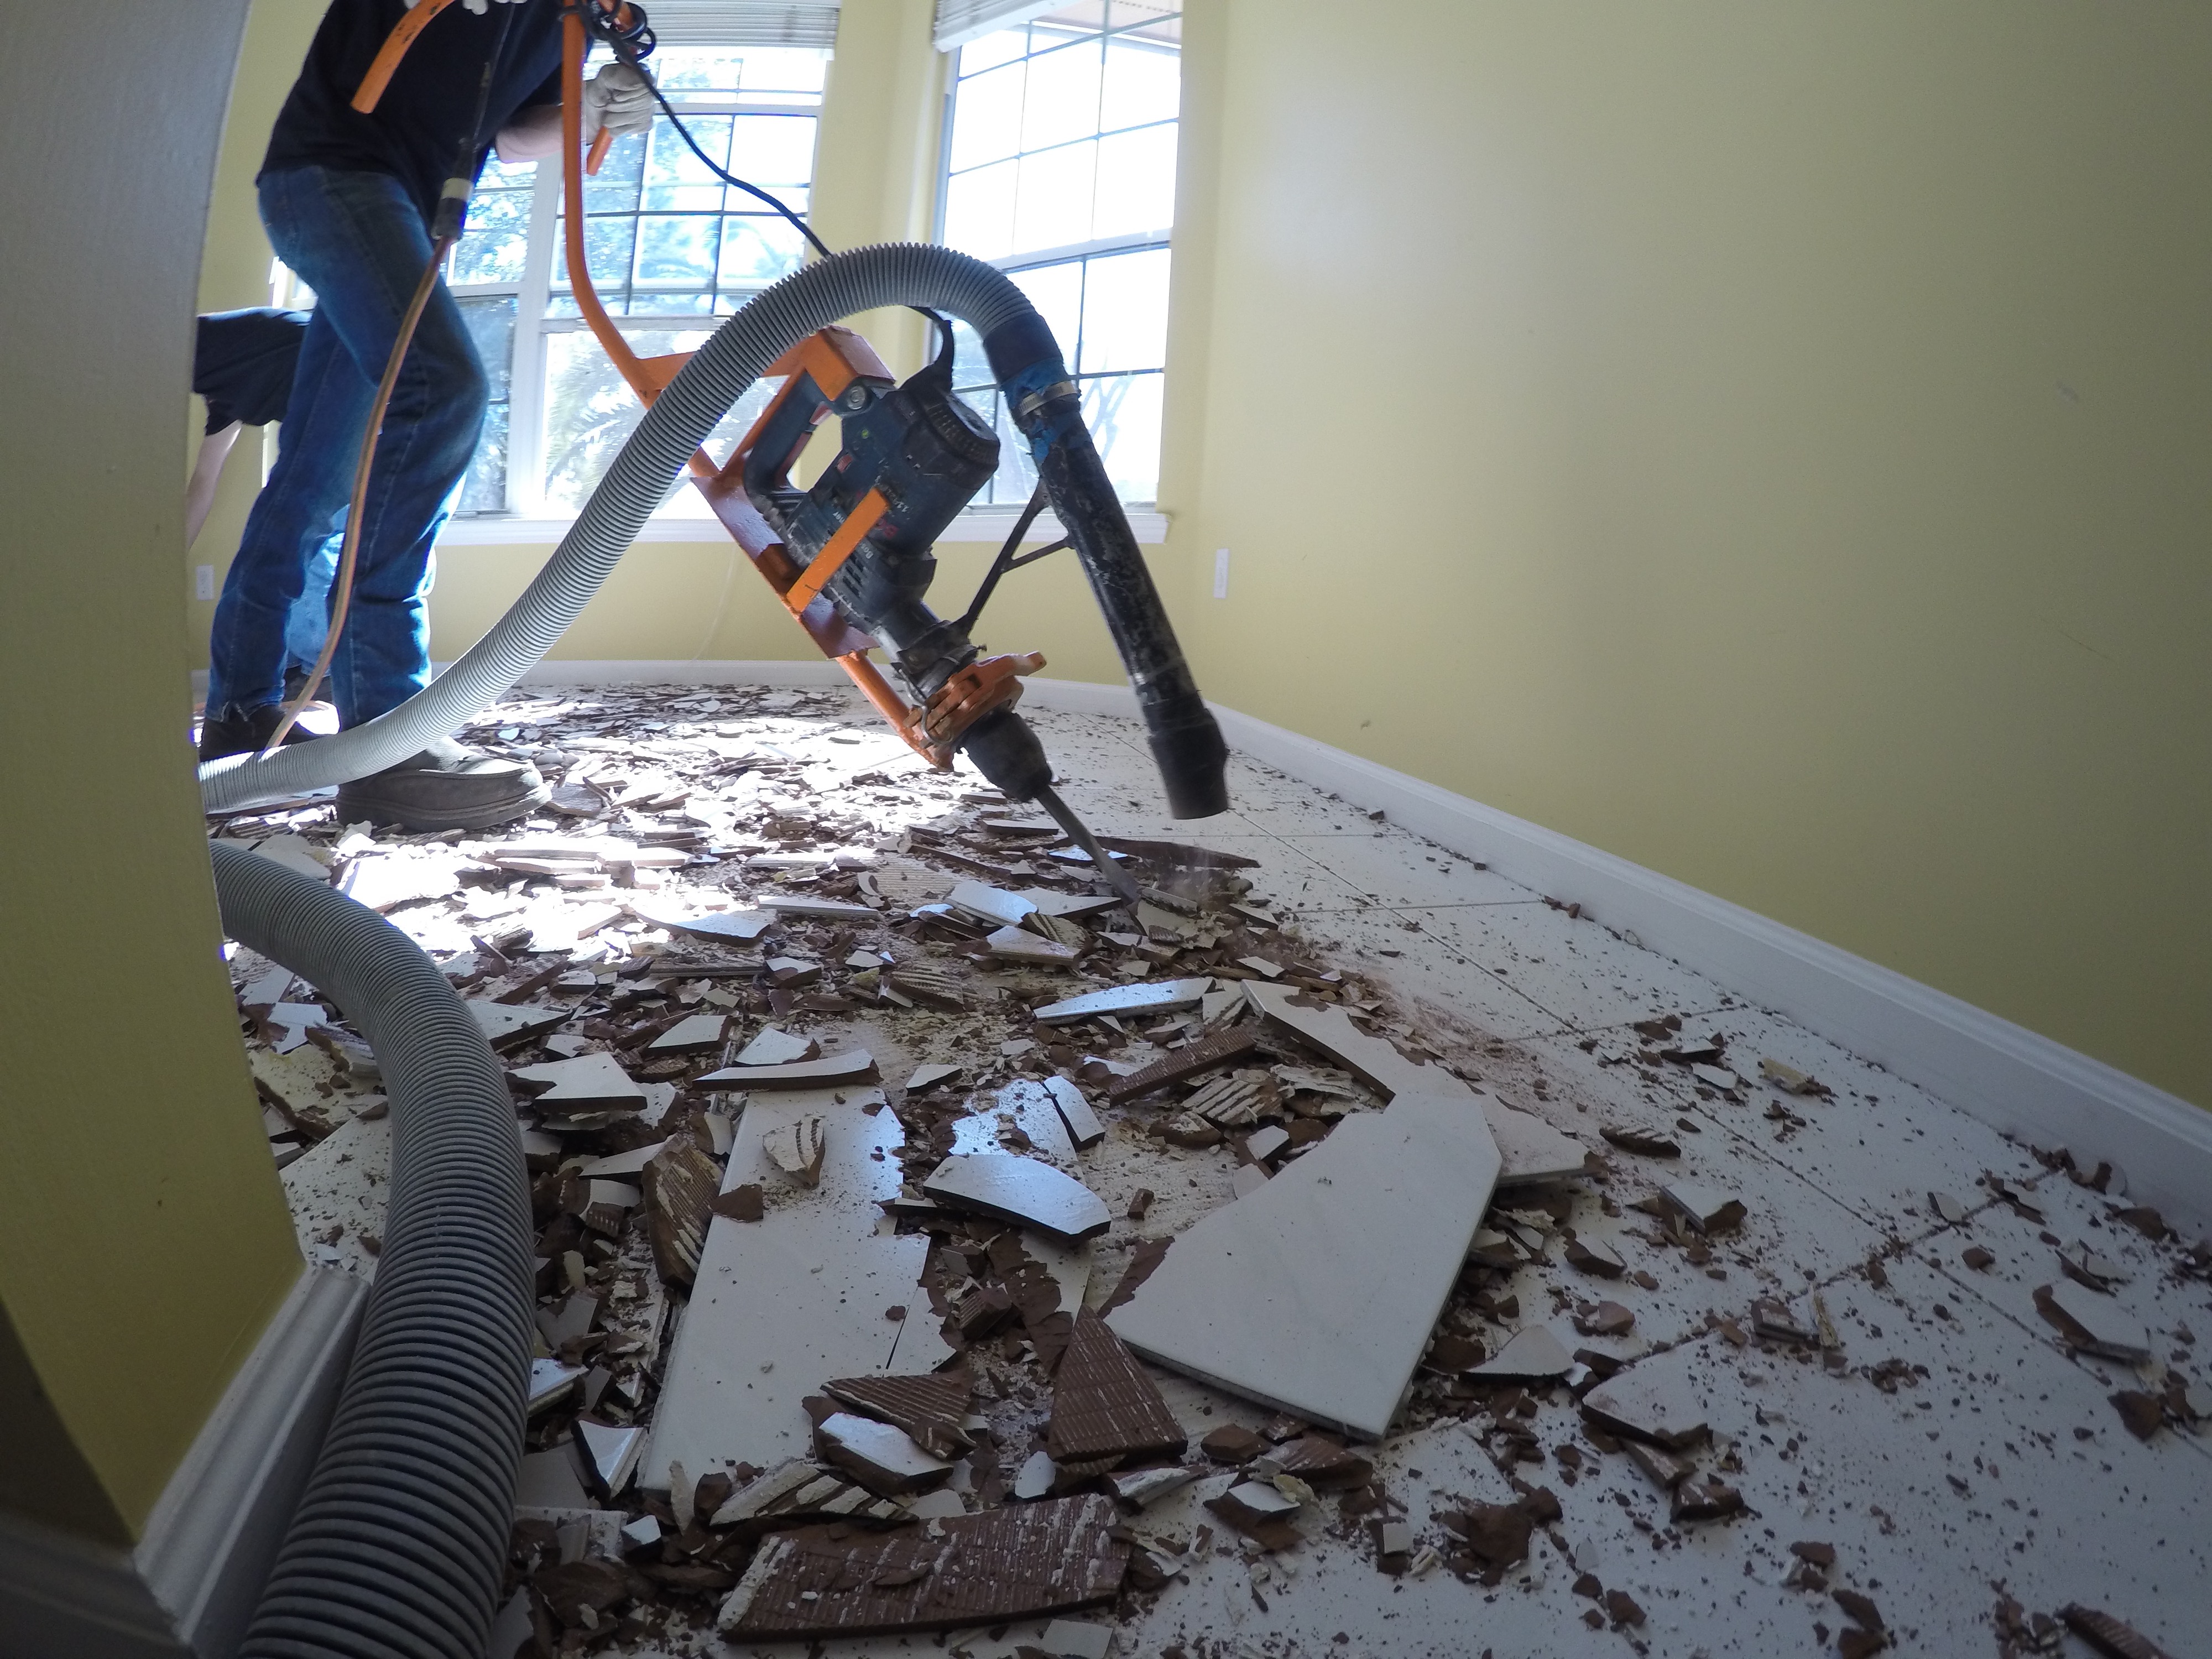 Tile Removal The Easy Way Sdy, Removing Ceramic Floor Tile